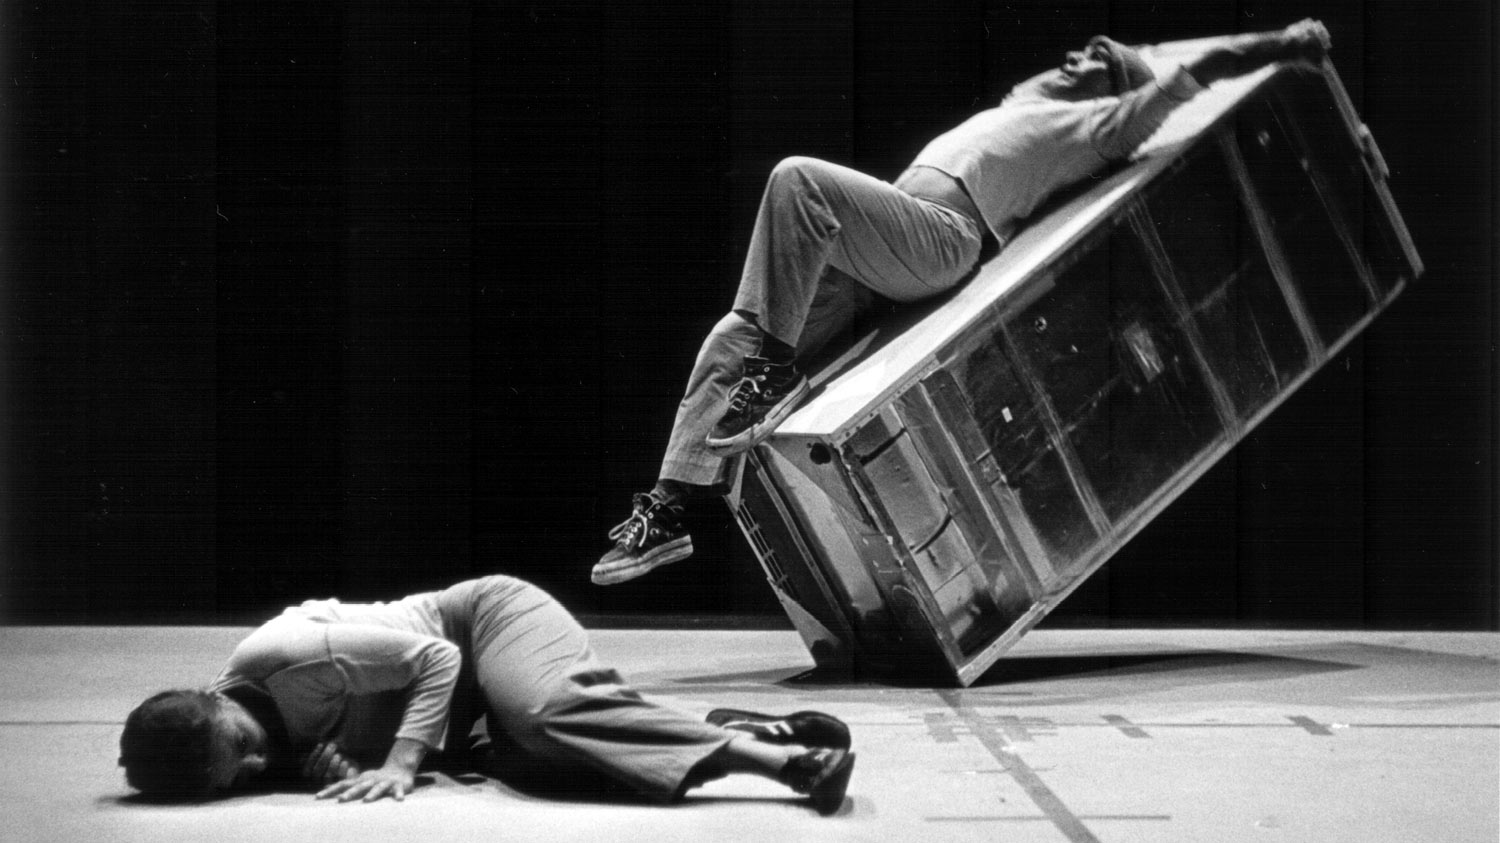 a woman lying upstage of a man laying across a refridgerator at a 45 degree angle about to tip over